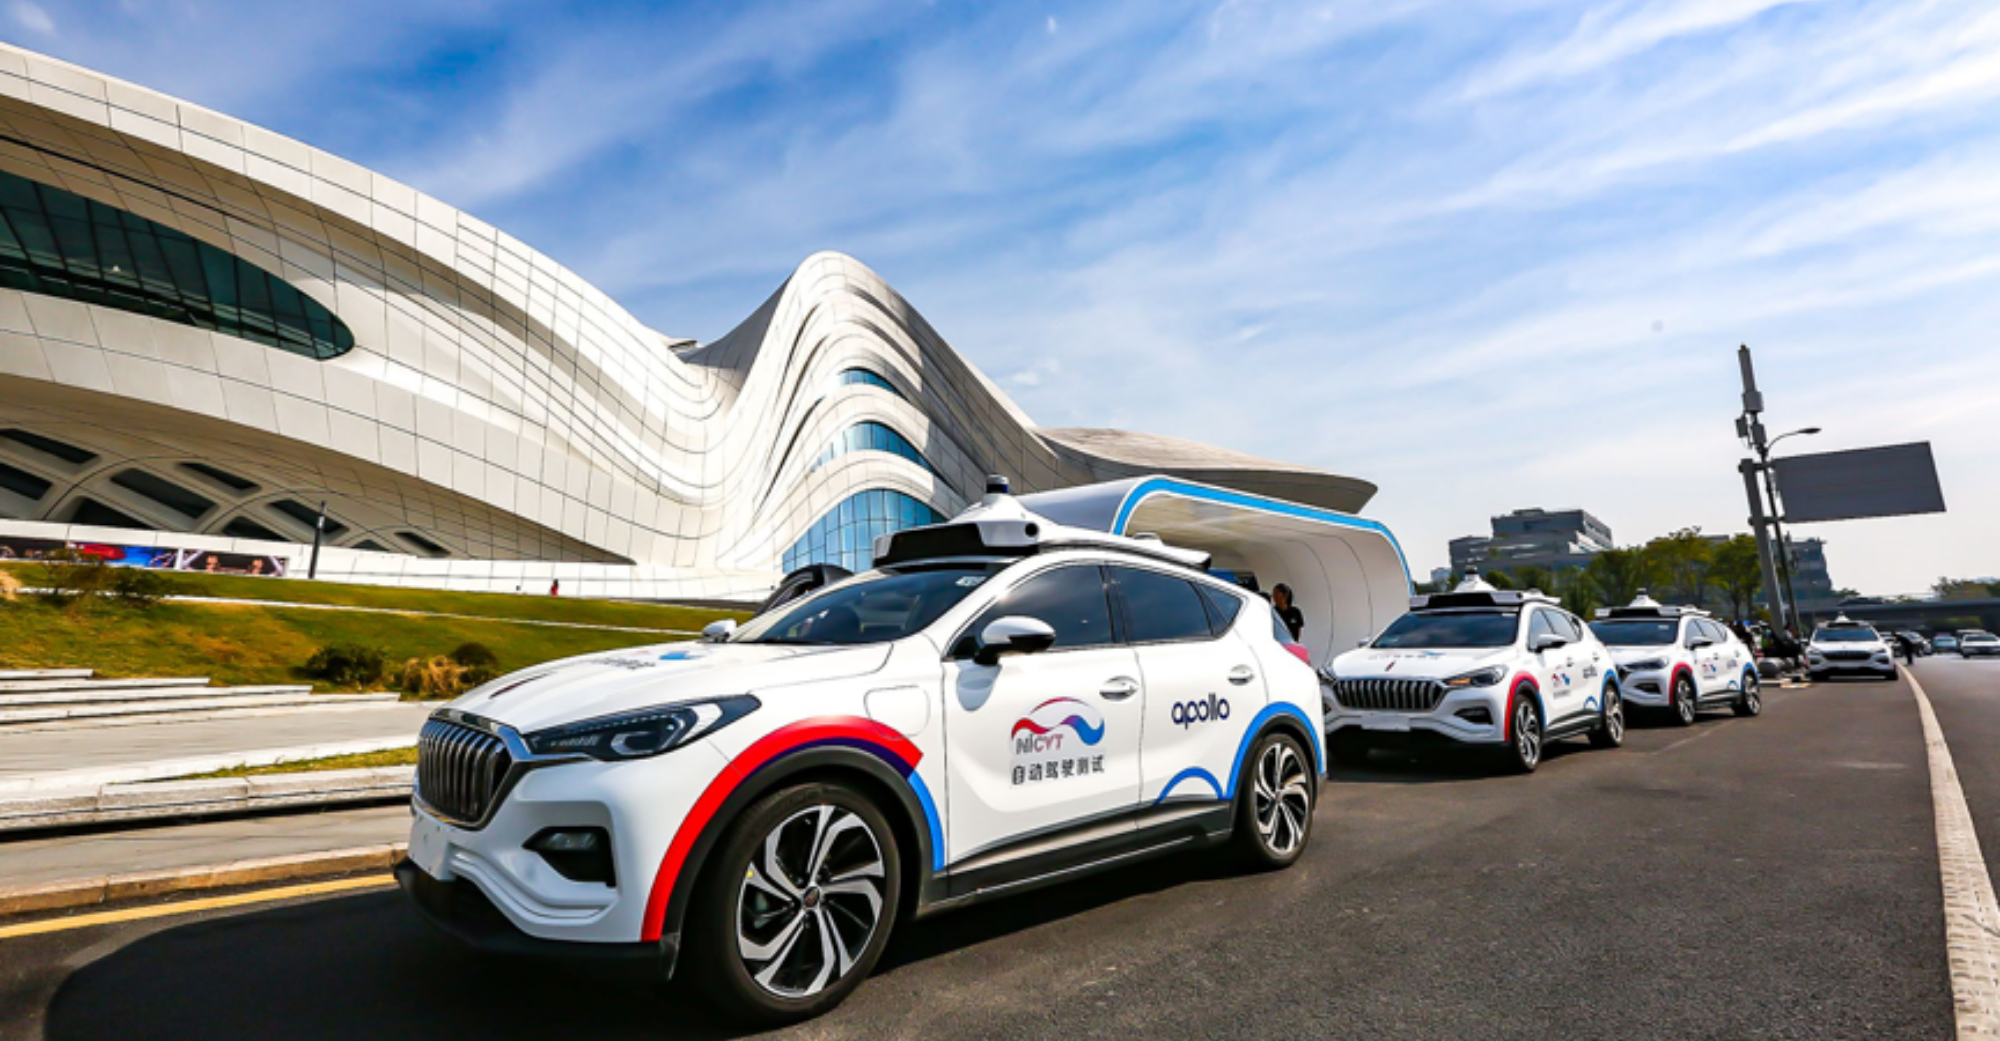 Chinese Tech Giant Baidu Steps Up Its Game to Get Autonomous Vehicles on the Road